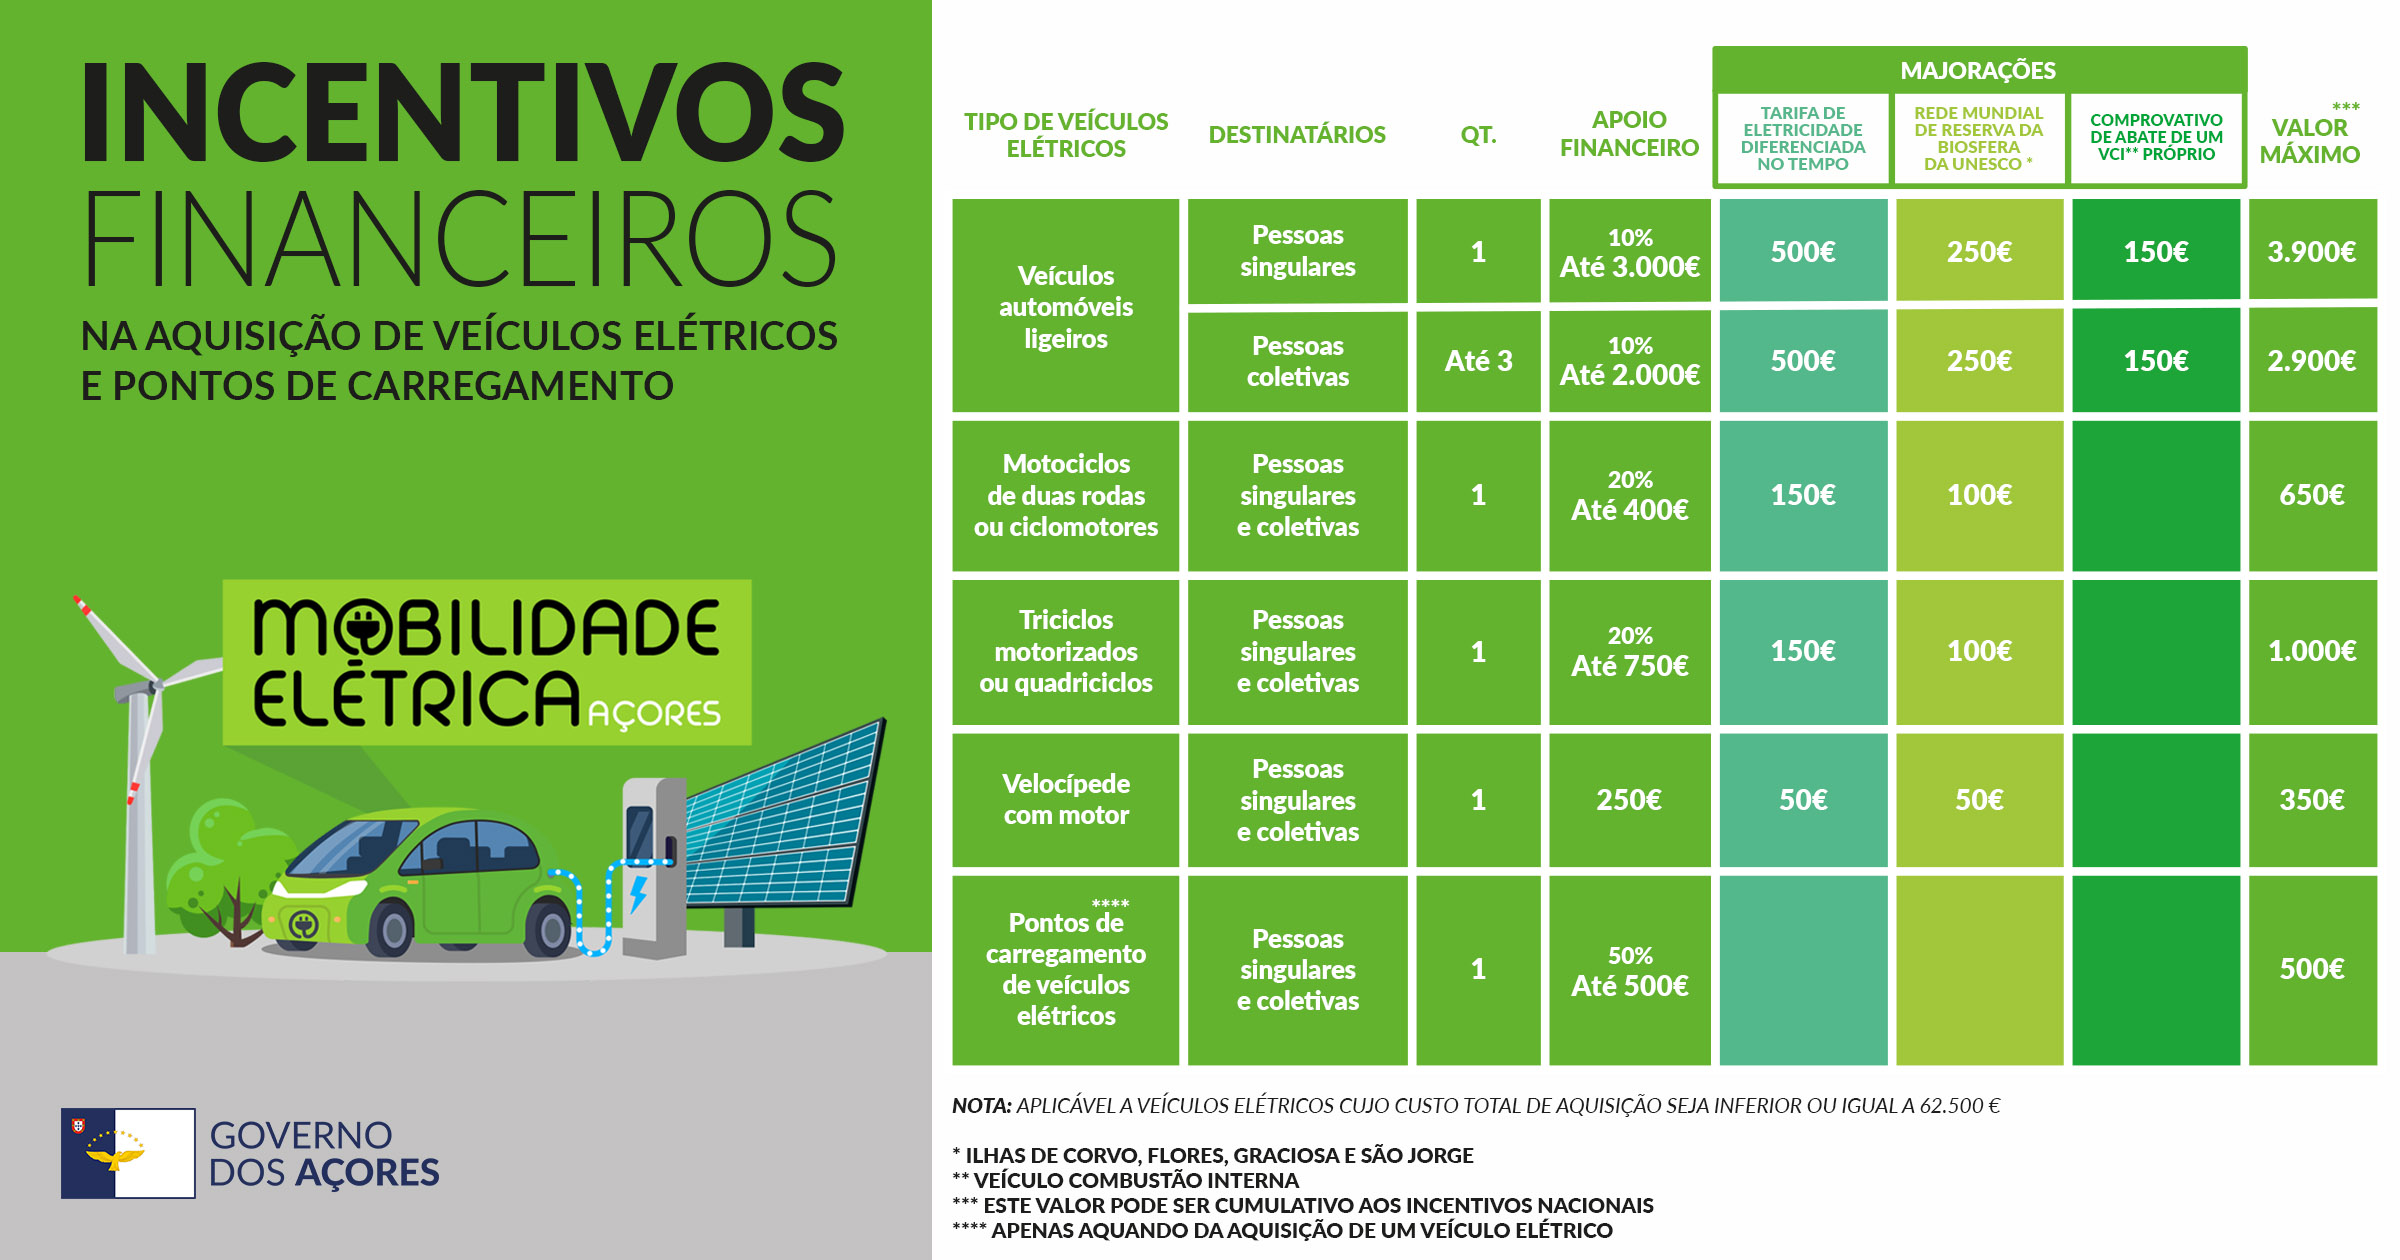 Financial Incentives for EVs published in the Azores